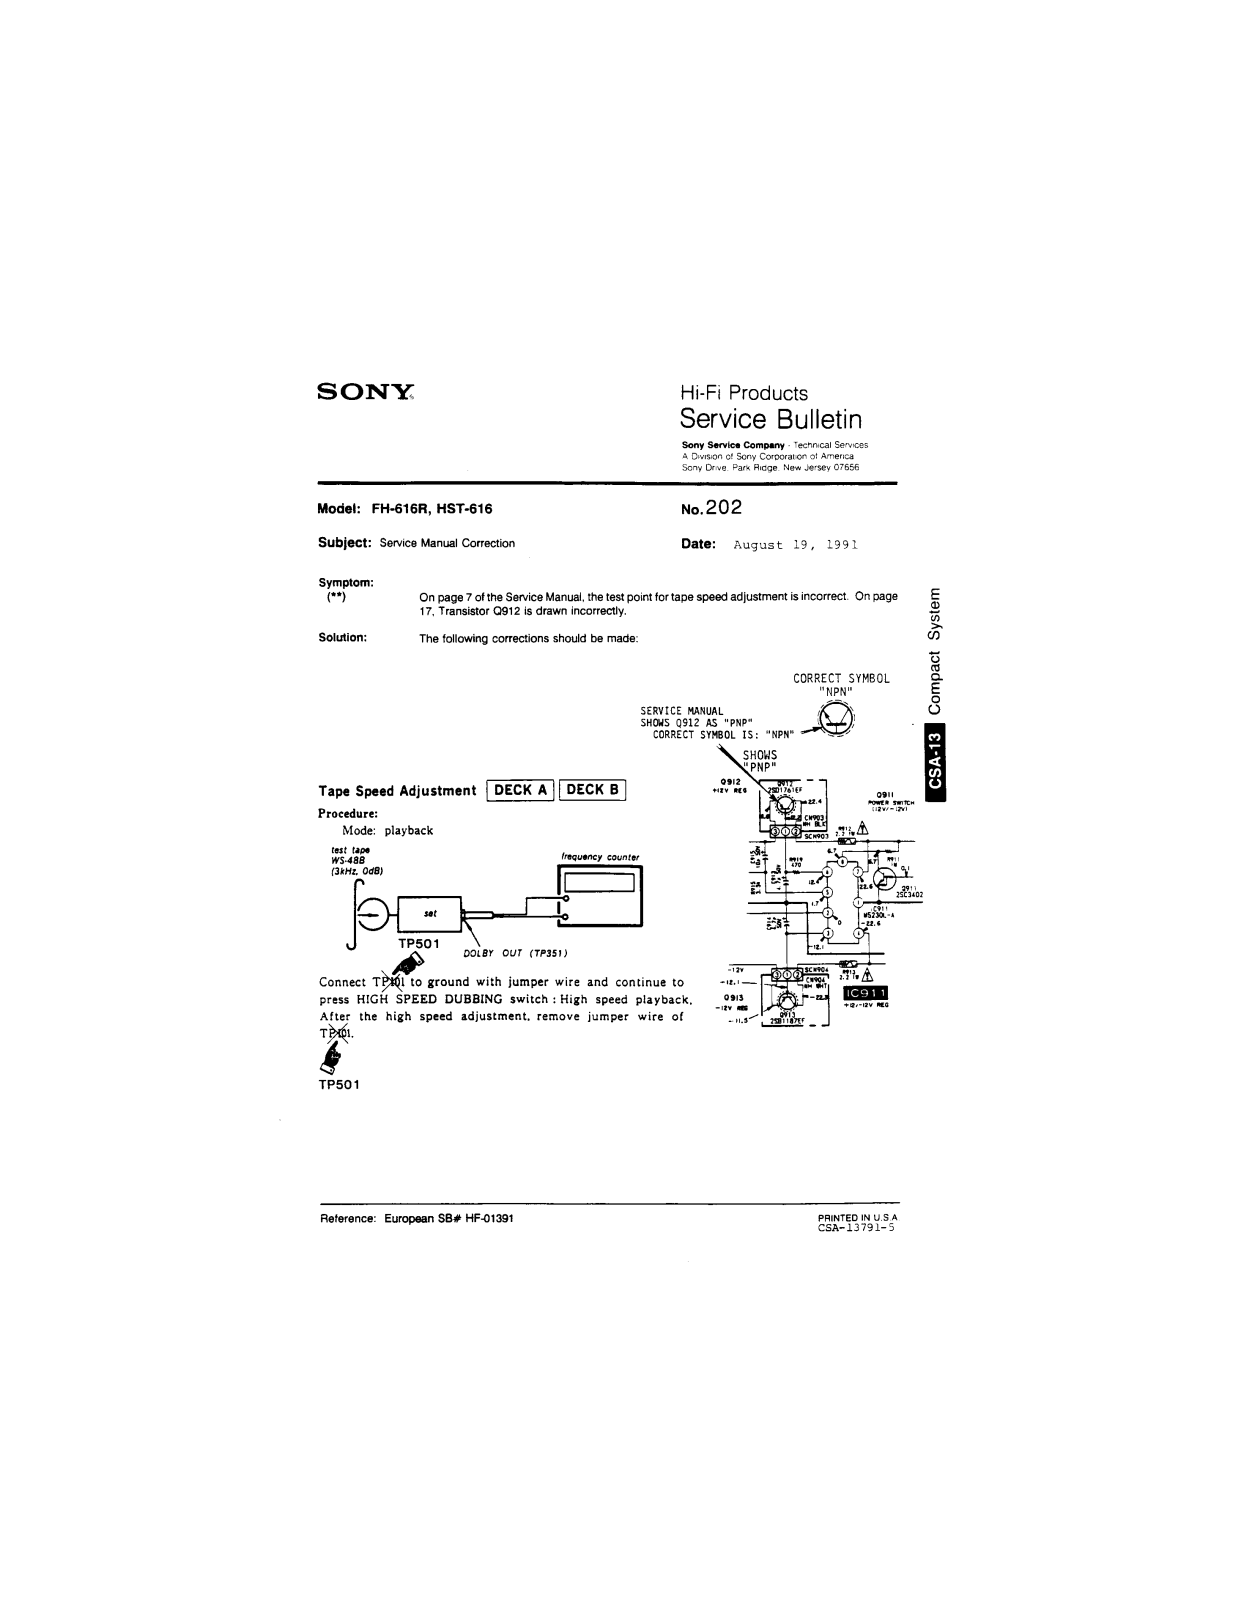 Sony FH-616R, HST-616 Service Manual